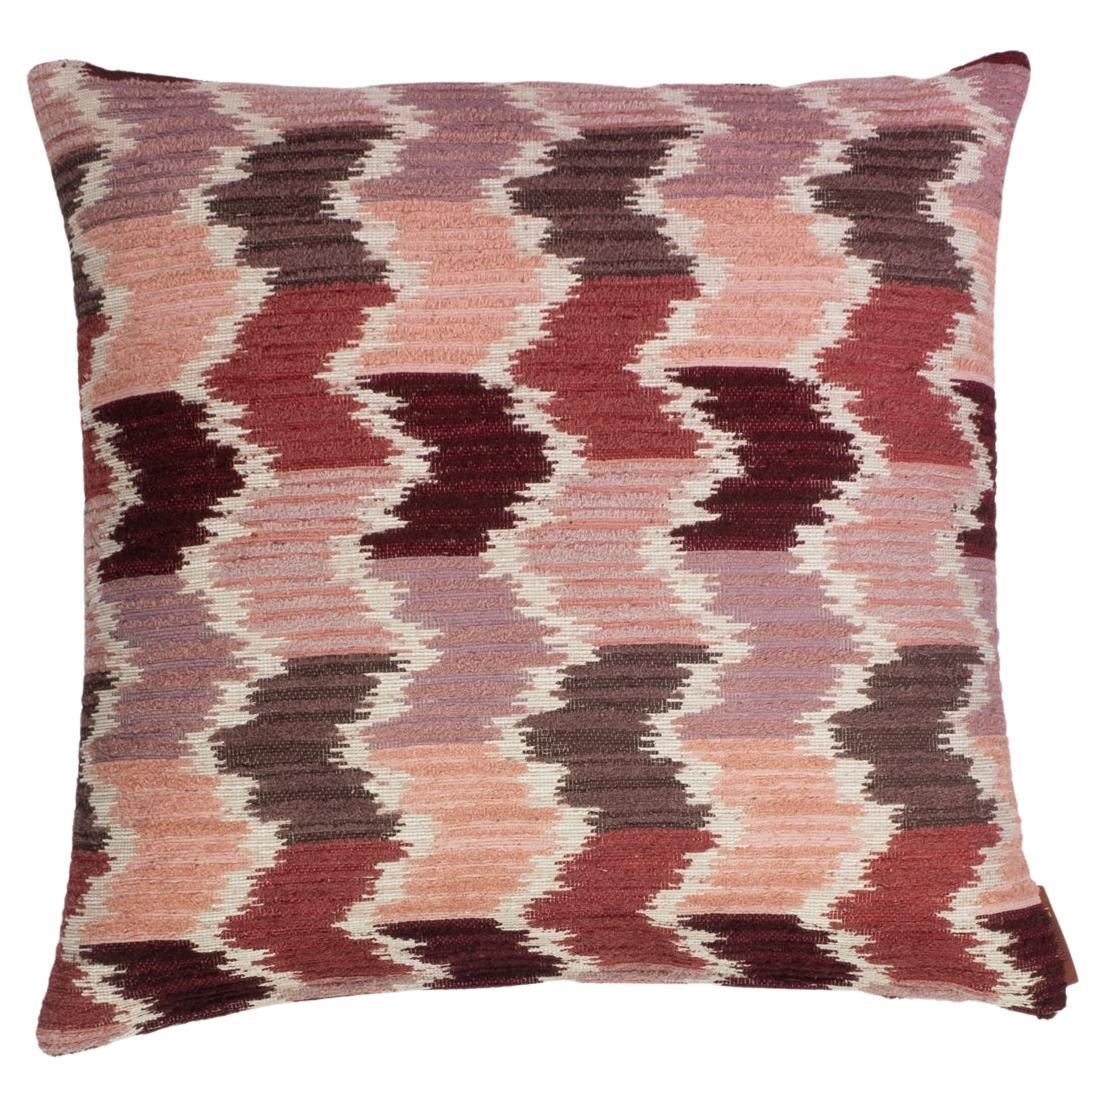 Modern Throw Patterned Pink Pillow "Micca" Rose by Evolution21